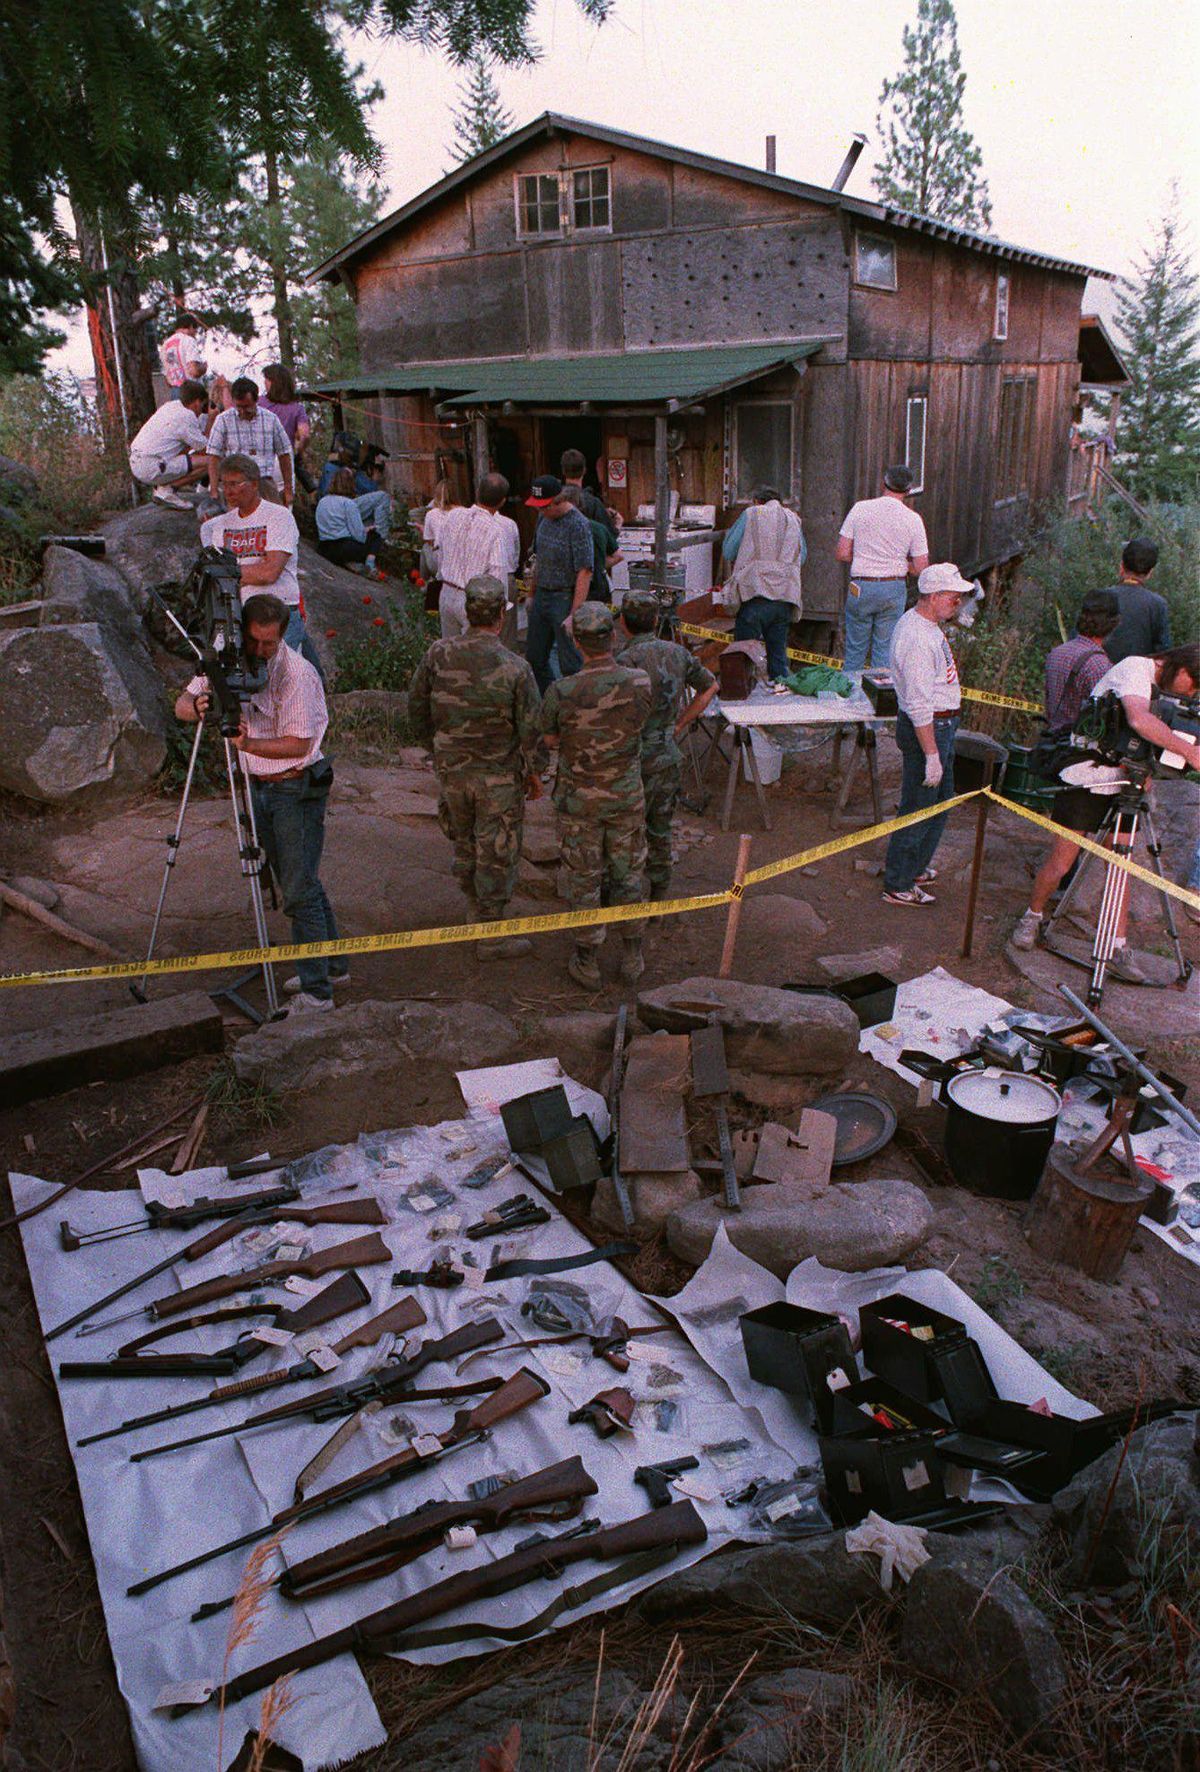 FILE – Federal agents and members of the media tour the outside of Randy Weaver’s home Sept. 1, 1992 near Naples, Idaho. Confiscated guns and ammunition are displayed on the ground following the end of the 11-day standoff. (GARY STEWART / ASSOCIATED PRESS)